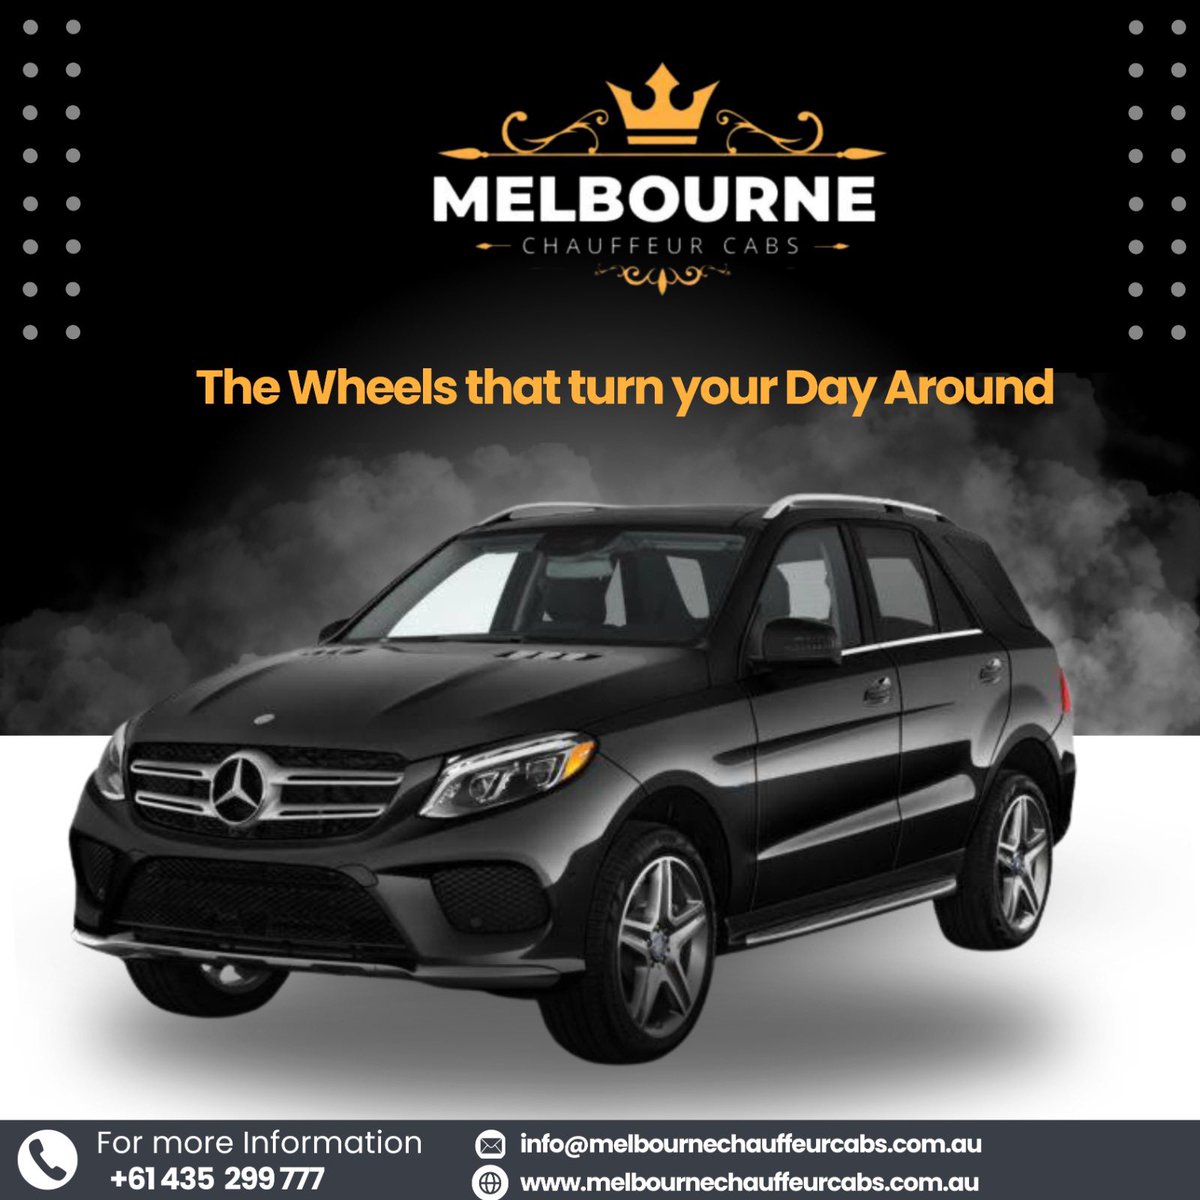 🌟 Ride in Style from Point Cook to Melbourne Airport for Just $100 with Melbourne Chauffeur Cabs! 🌟 Are you looking for a reliable and affordable transportation option from Point Cook to Melbourne Airport? Look no further than Melbourne Chauffeur Cabs! Our Euro cars are at